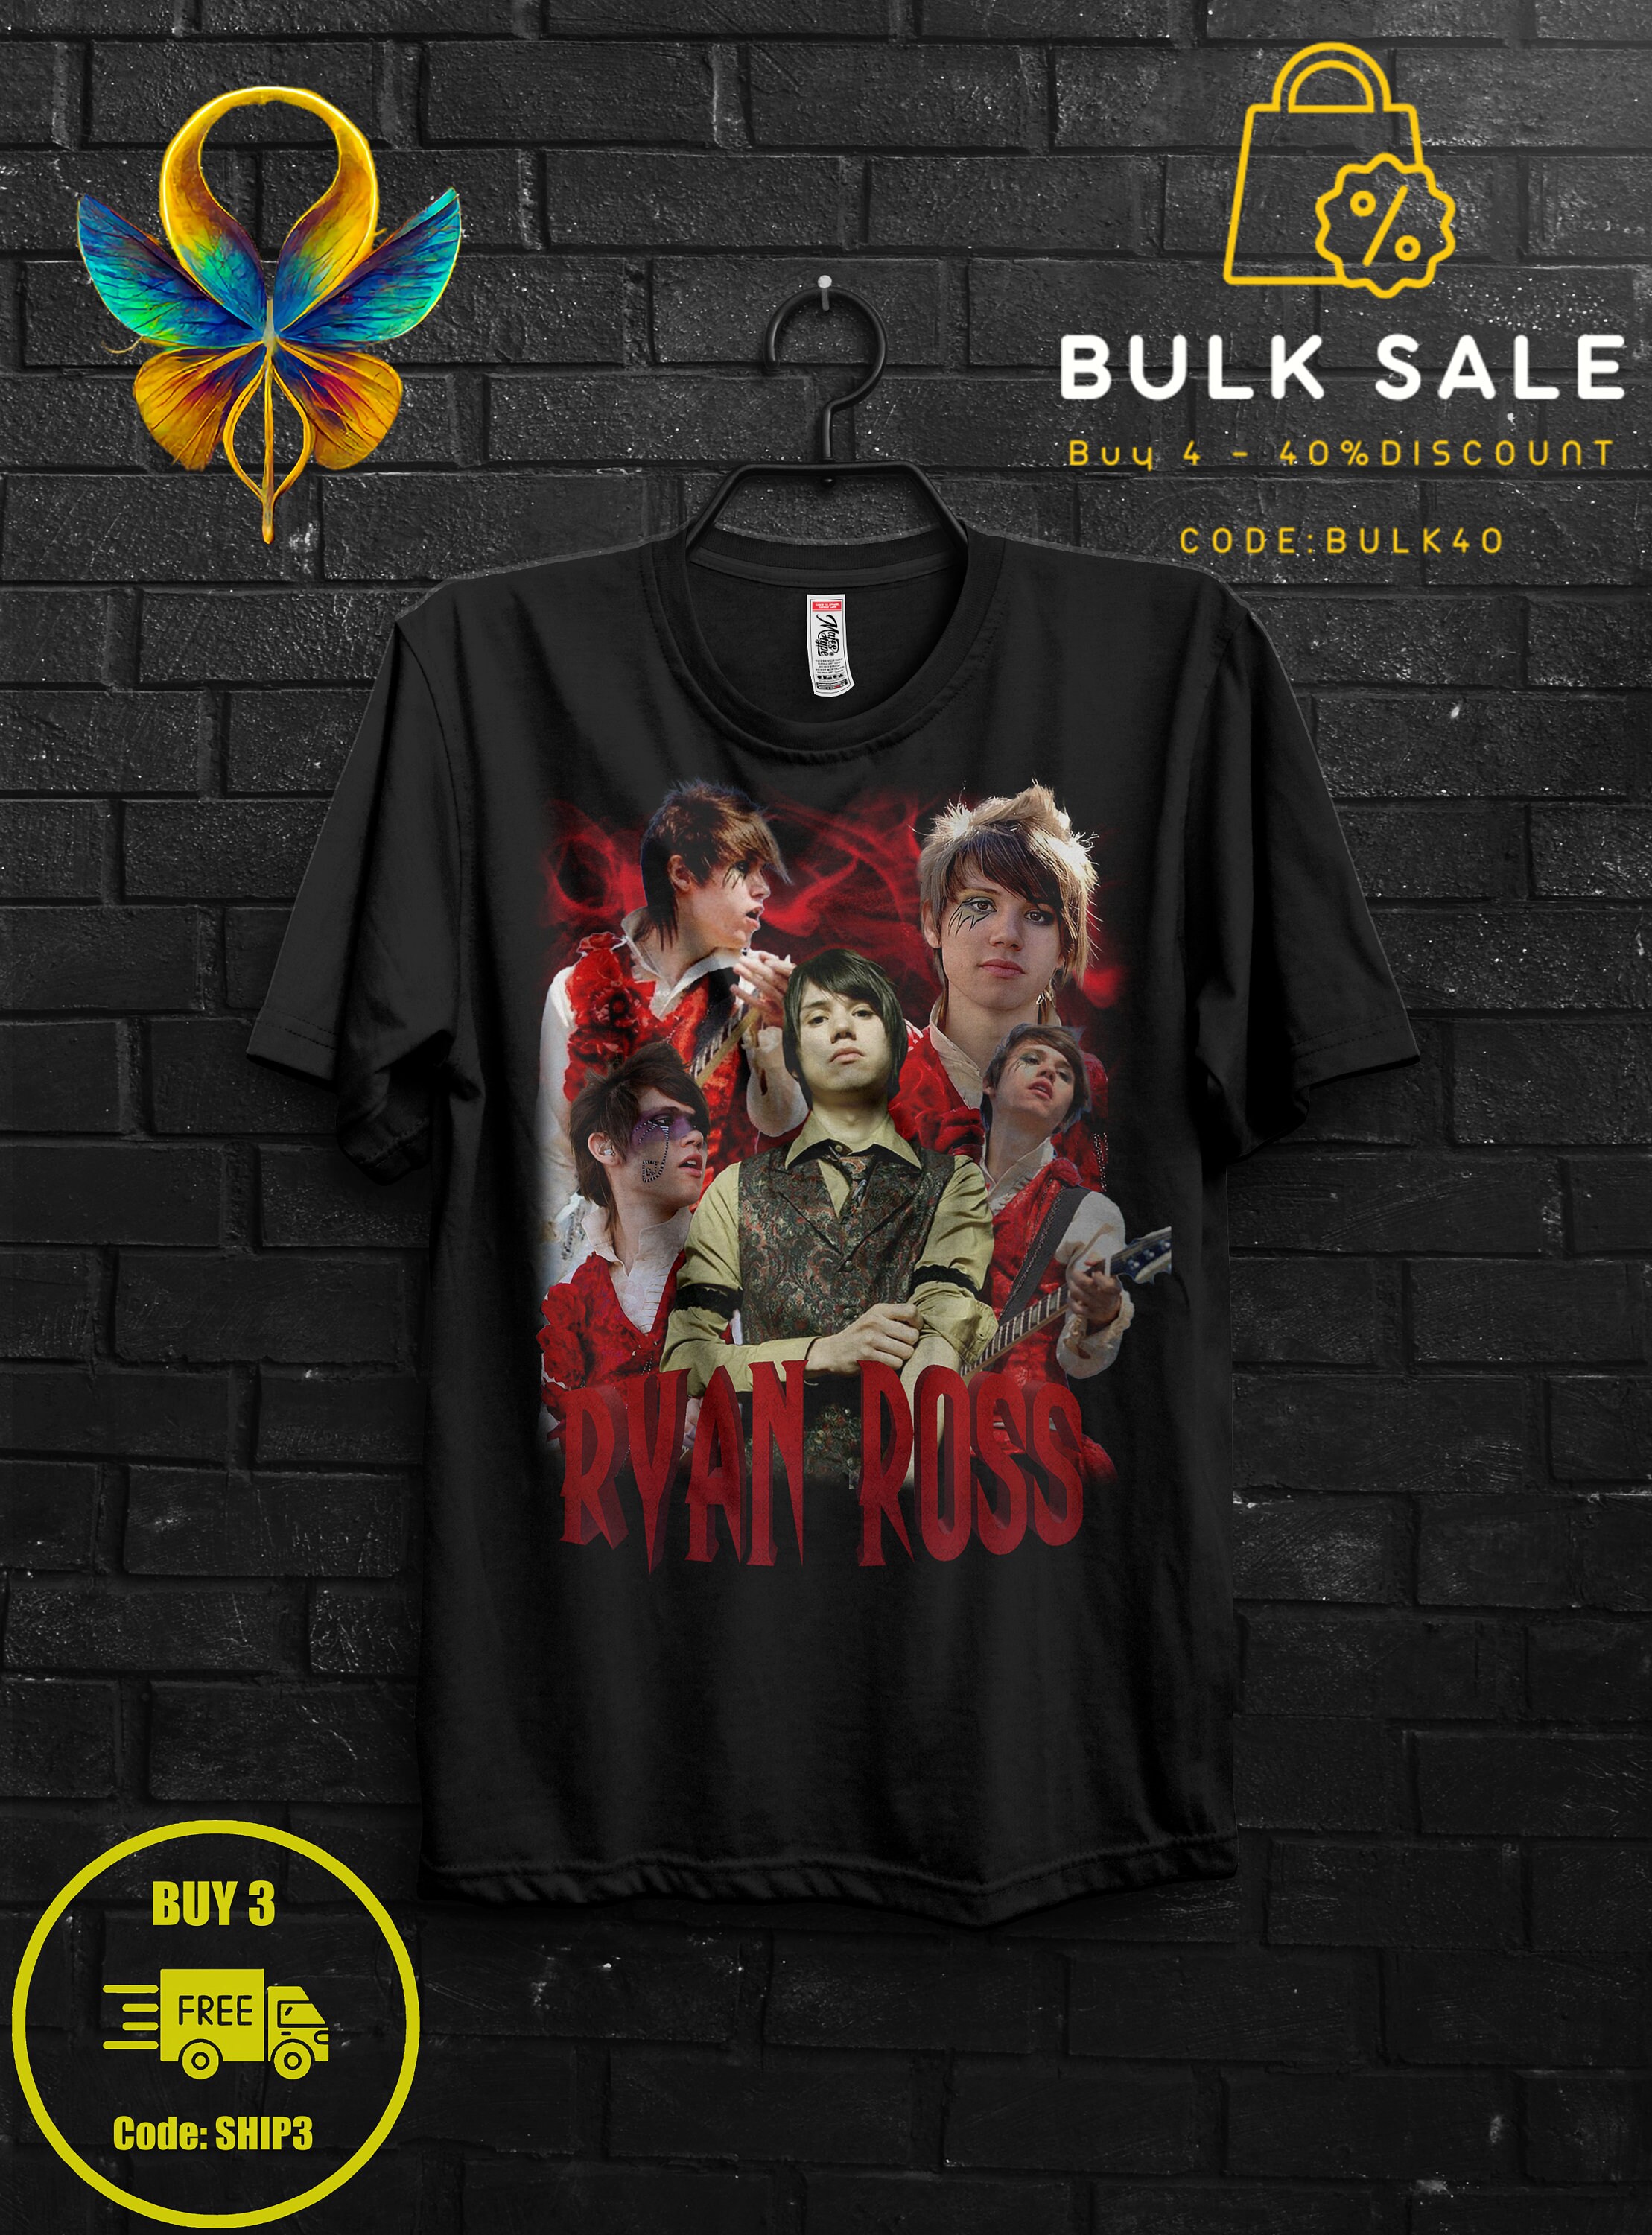 Ryan Ross Fan Gift TShirt,The Young Veins Emo Tee,Brendon Urie and John Walker Shirt,Afycso Appareal,Too Weird To Live Band,Widespread Panic 1546753314